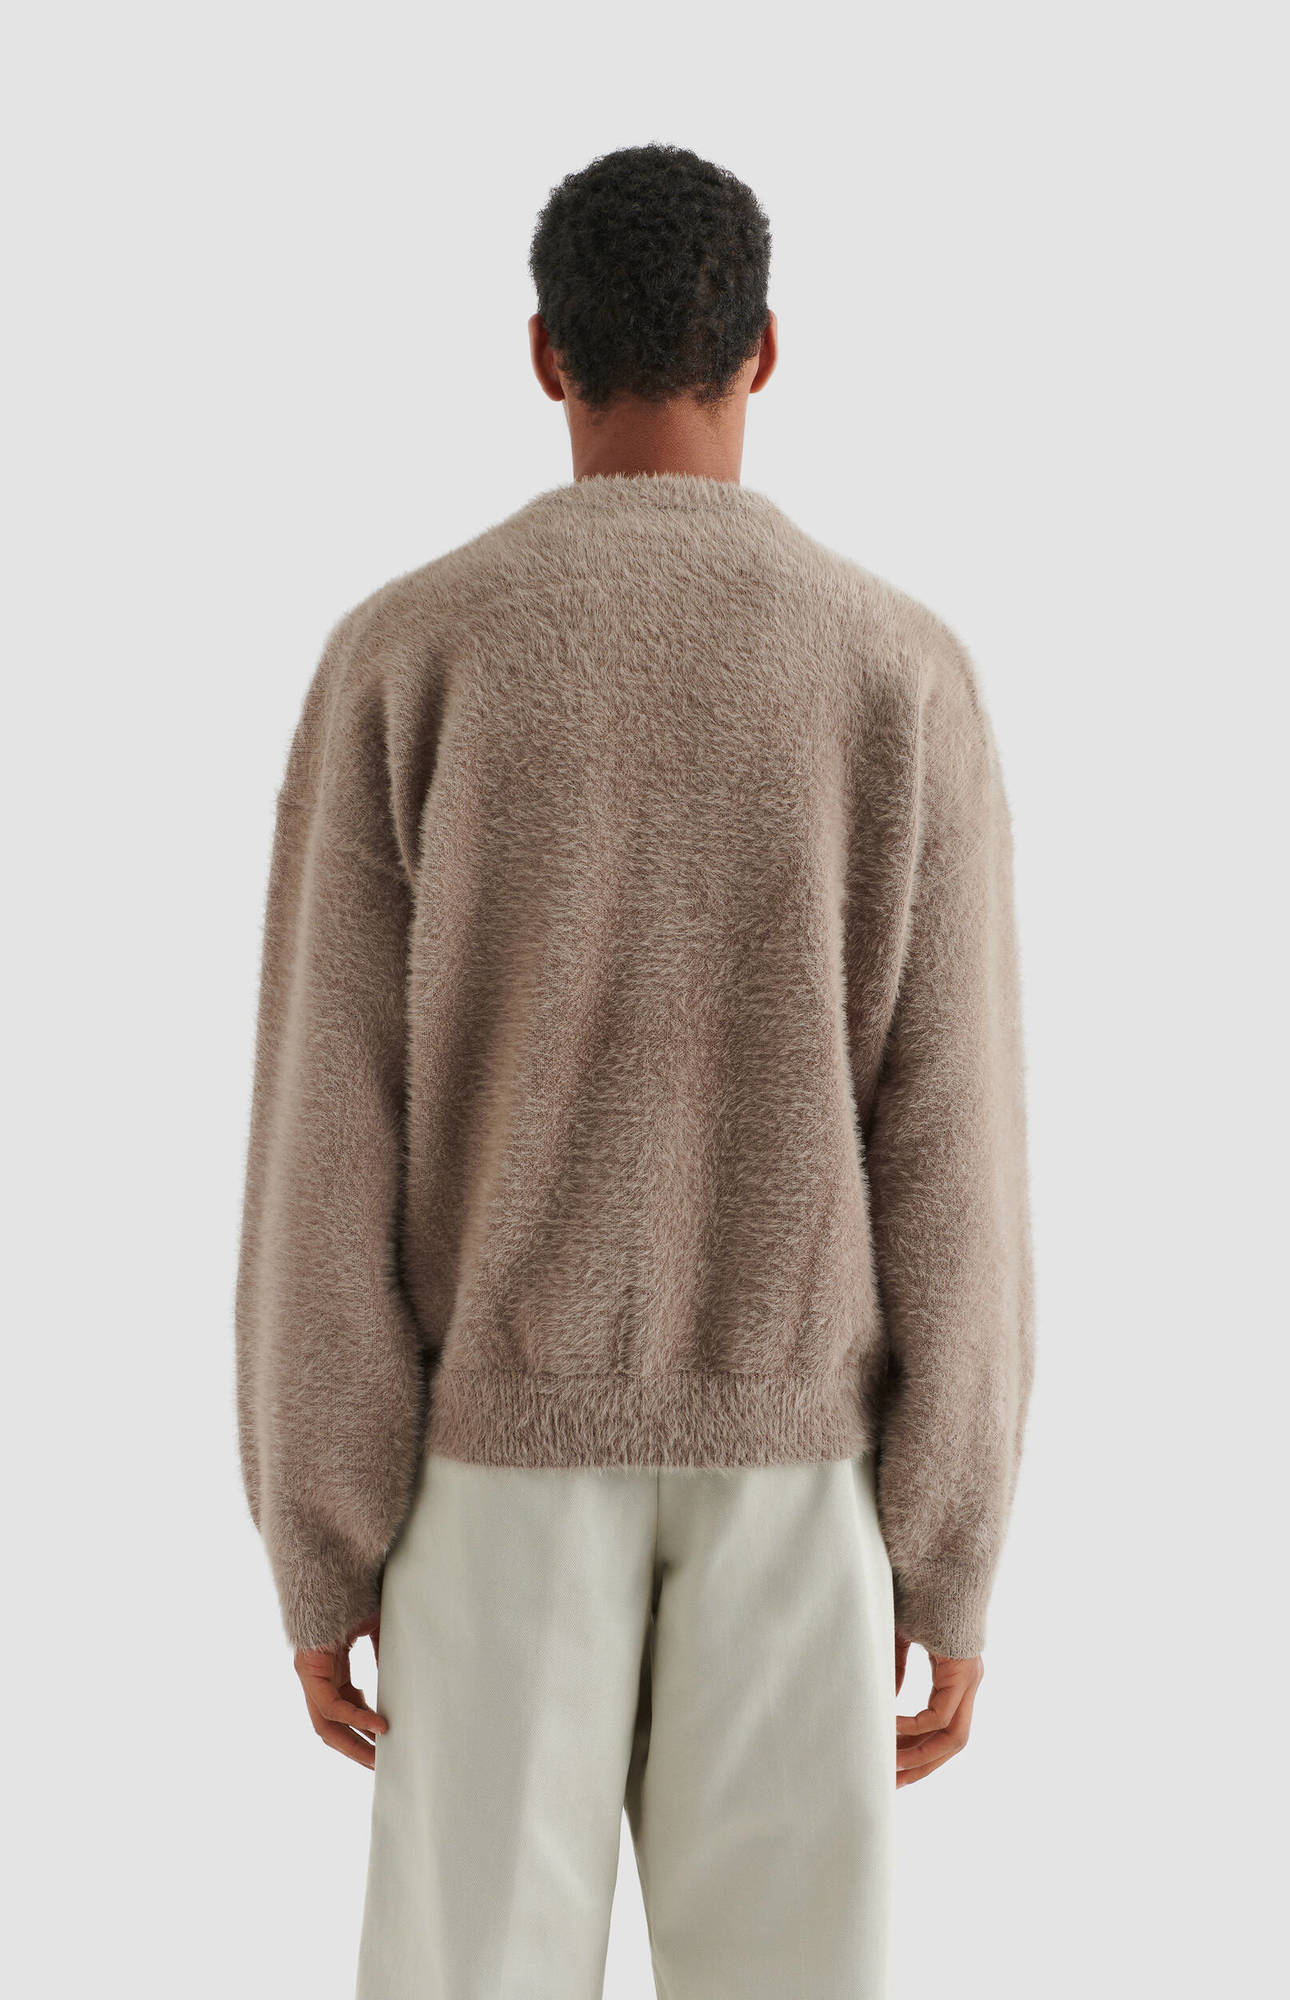 AXEL ARIGATO Miller Cardigan in Taupe XL